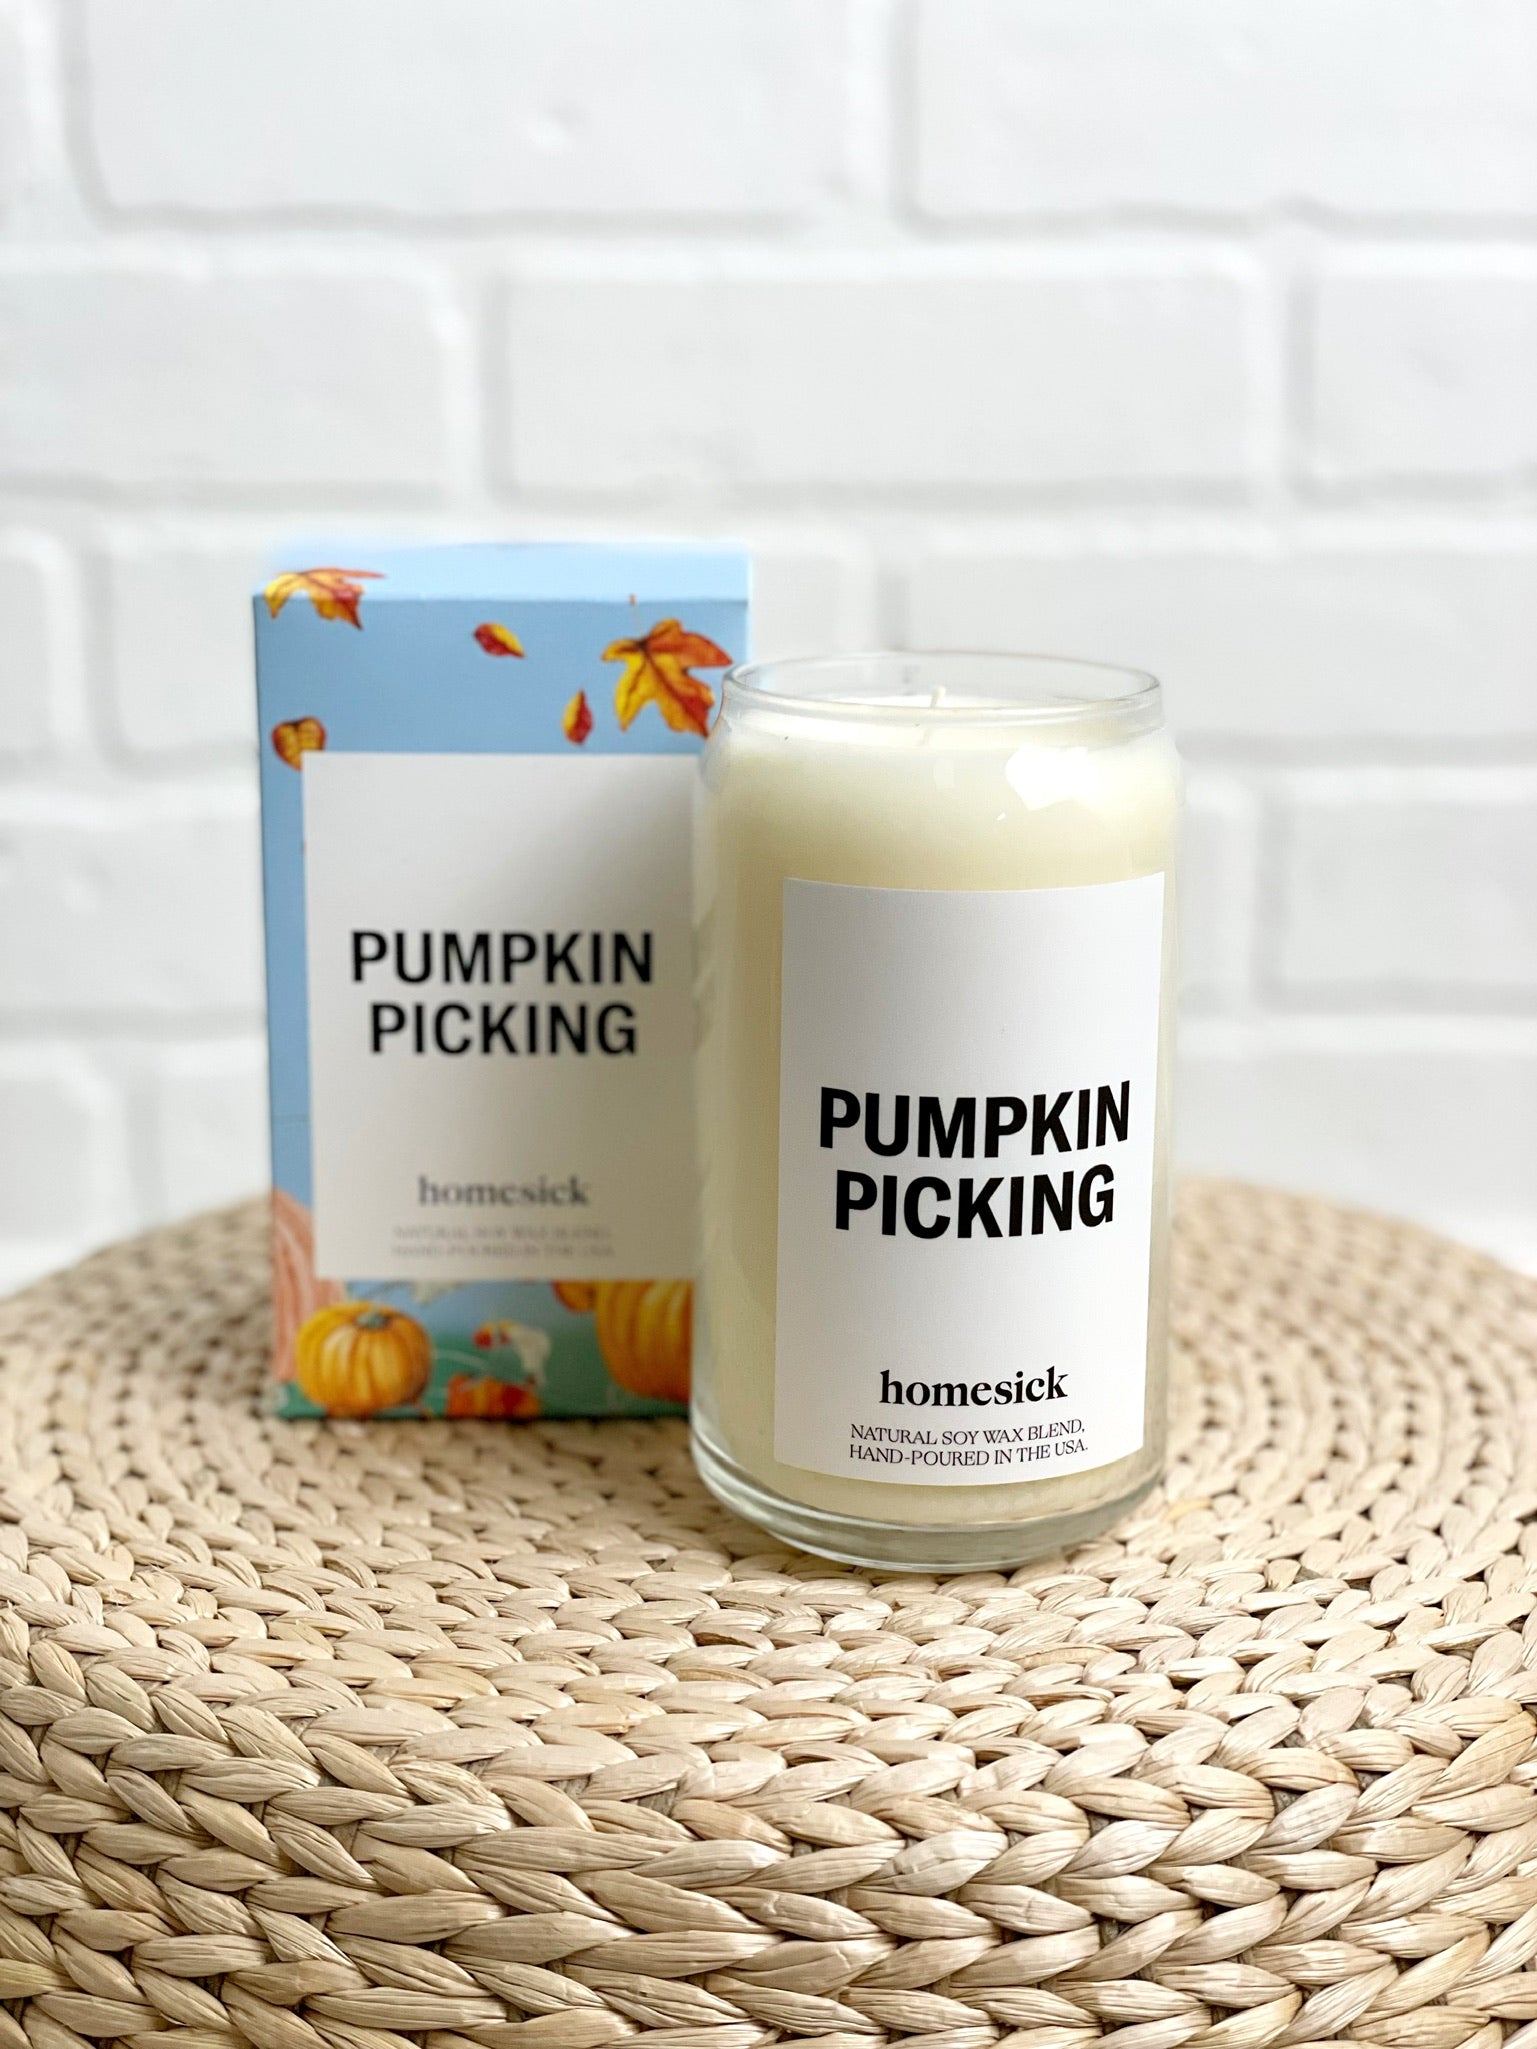 Homesick pumpkin picking candle - Trendy Candles at Lush Fashion Lounge Boutique in Oklahoma City